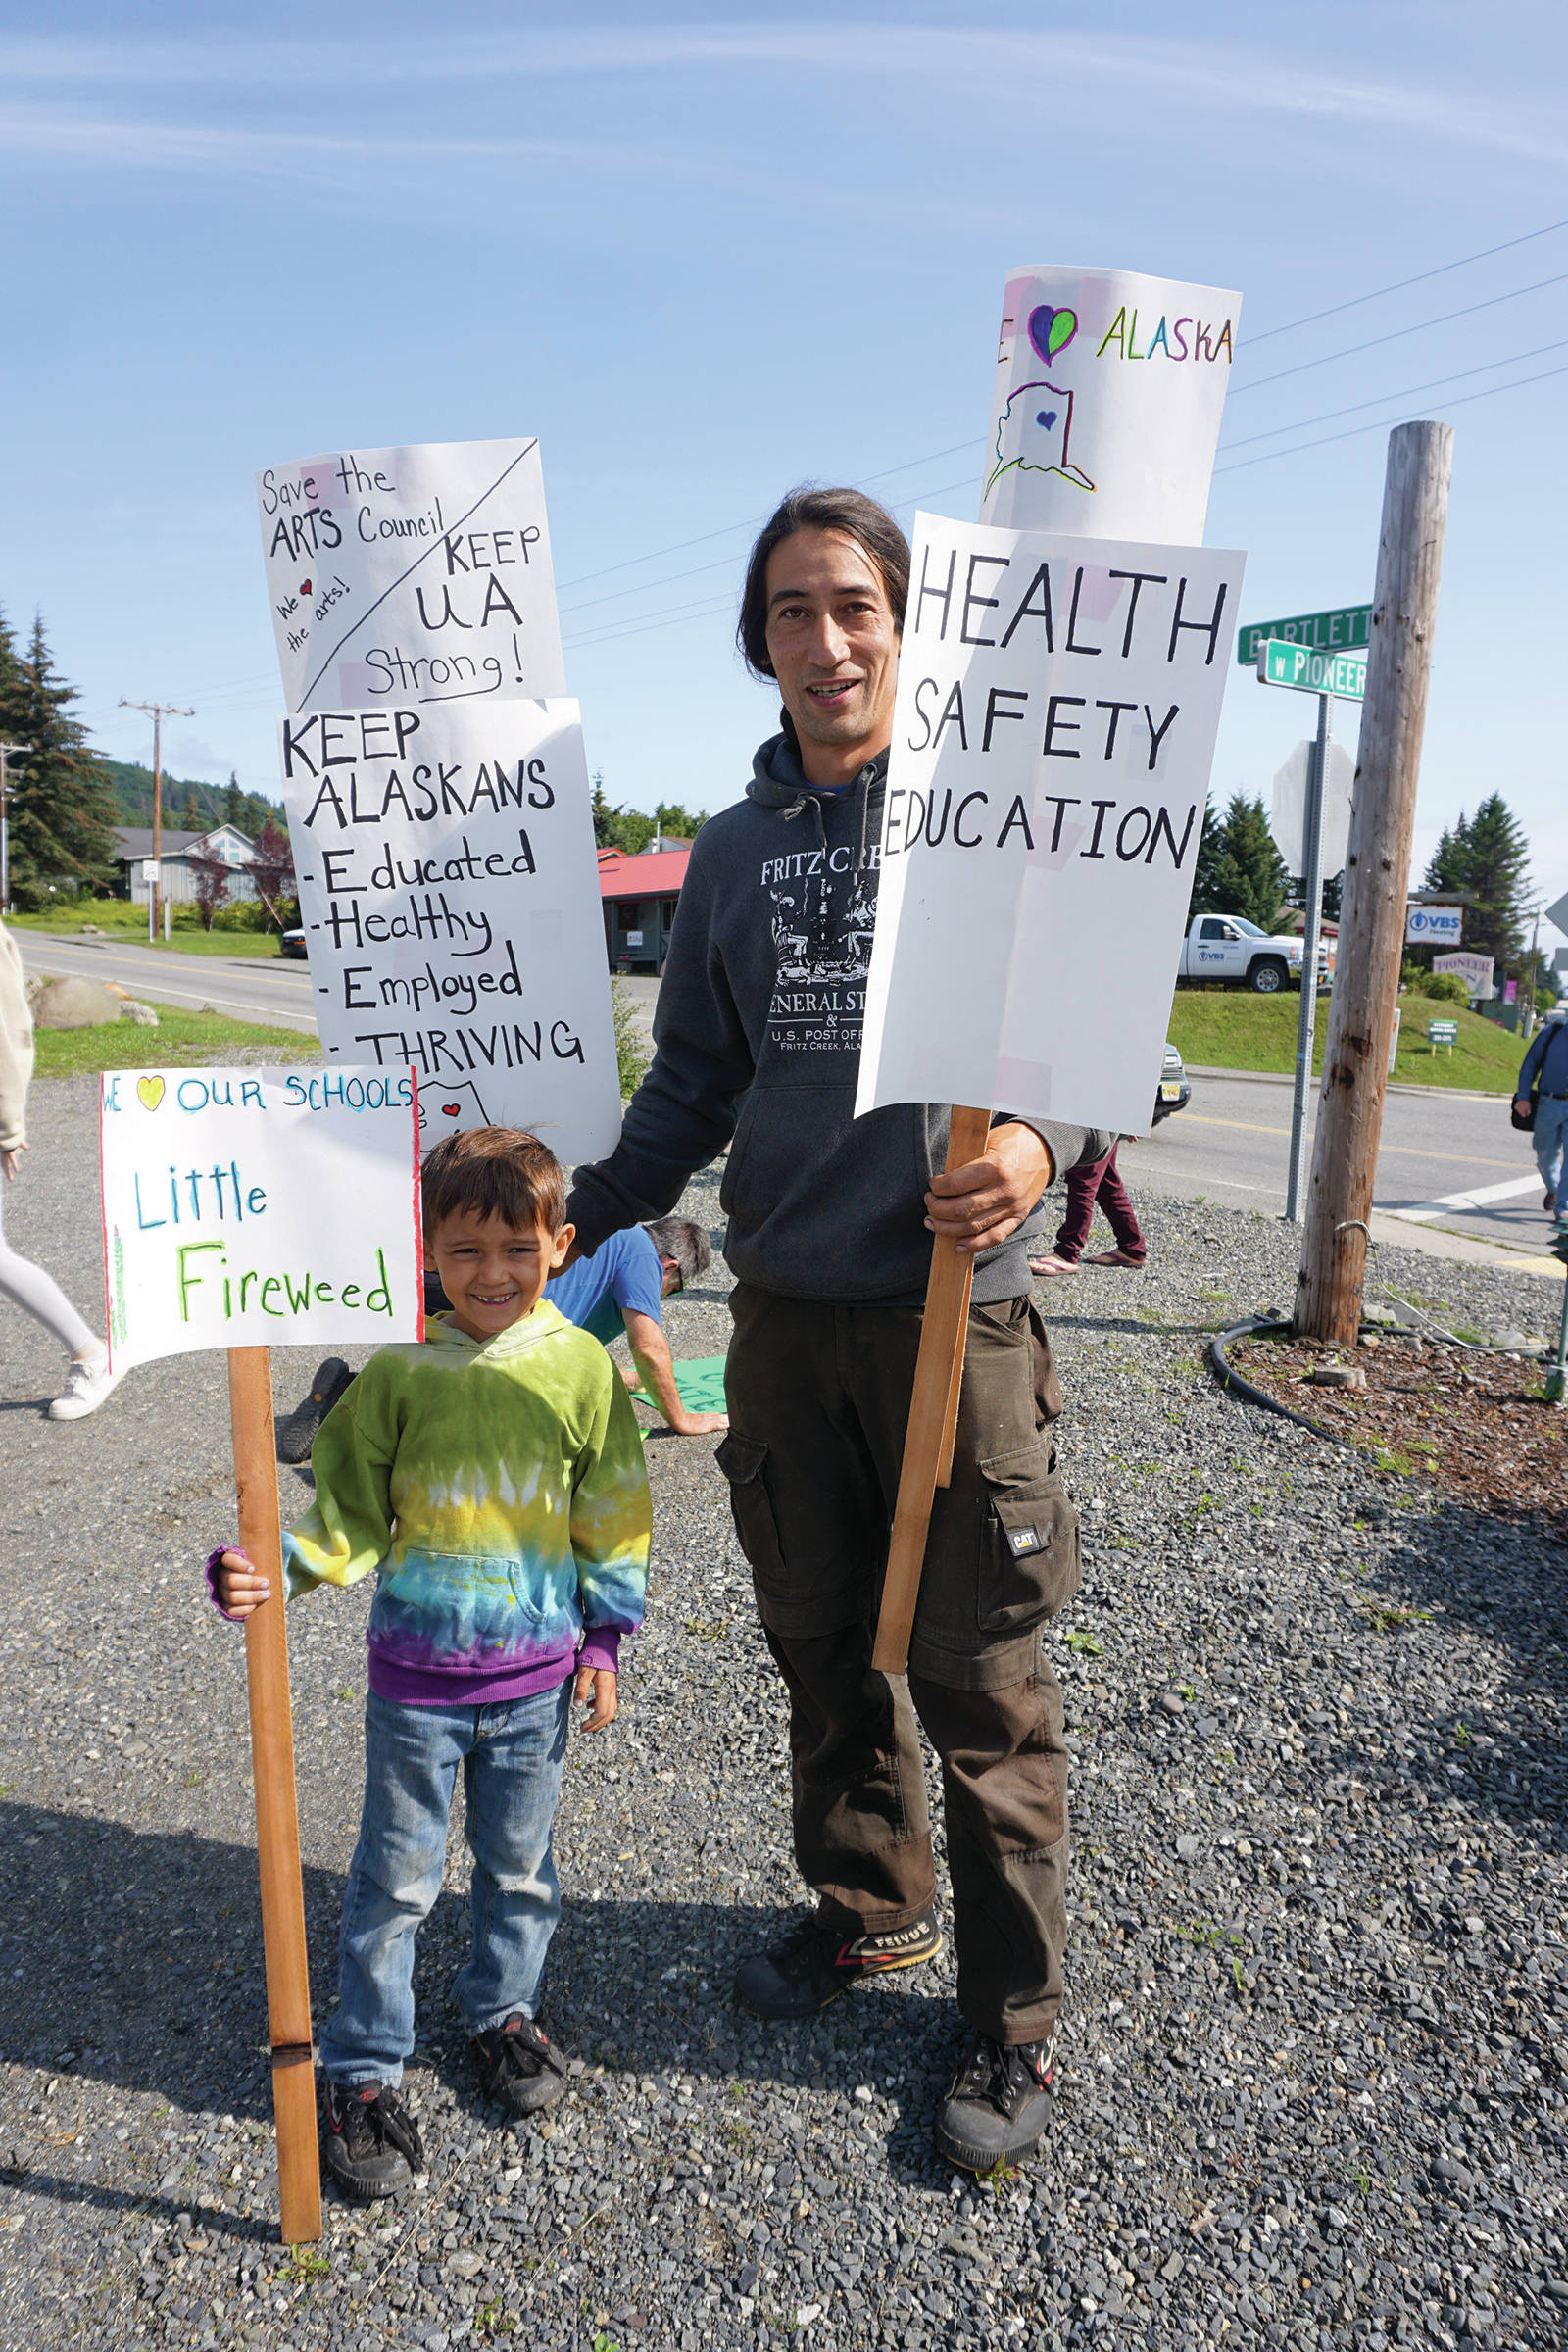 Nako Cook, left and Jared Cook, right, hold signs at a rally Sunday, July 28, 2019, against Gov. Mike Dunleavy’s budget cuts at the Legislative Information Office, Homer, Alaska. (Photo by Michael Armstrong/Homer News).